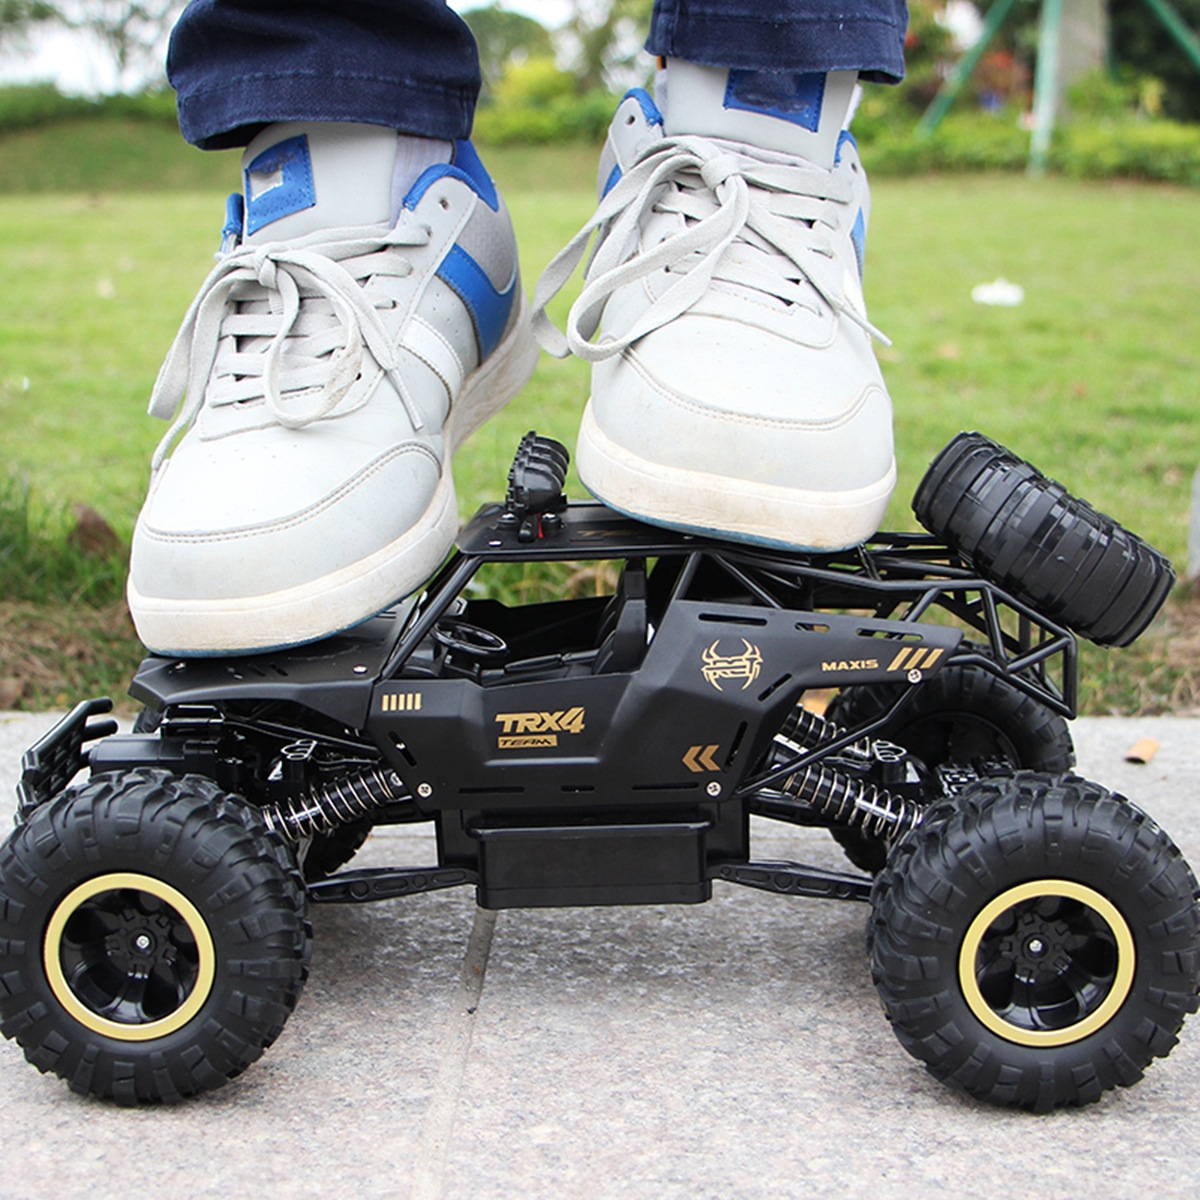 1/12 2.4G 2WD RC Car Crawler Truck Metal Body Vehicle Models Toys Indoor Outdoor Toys